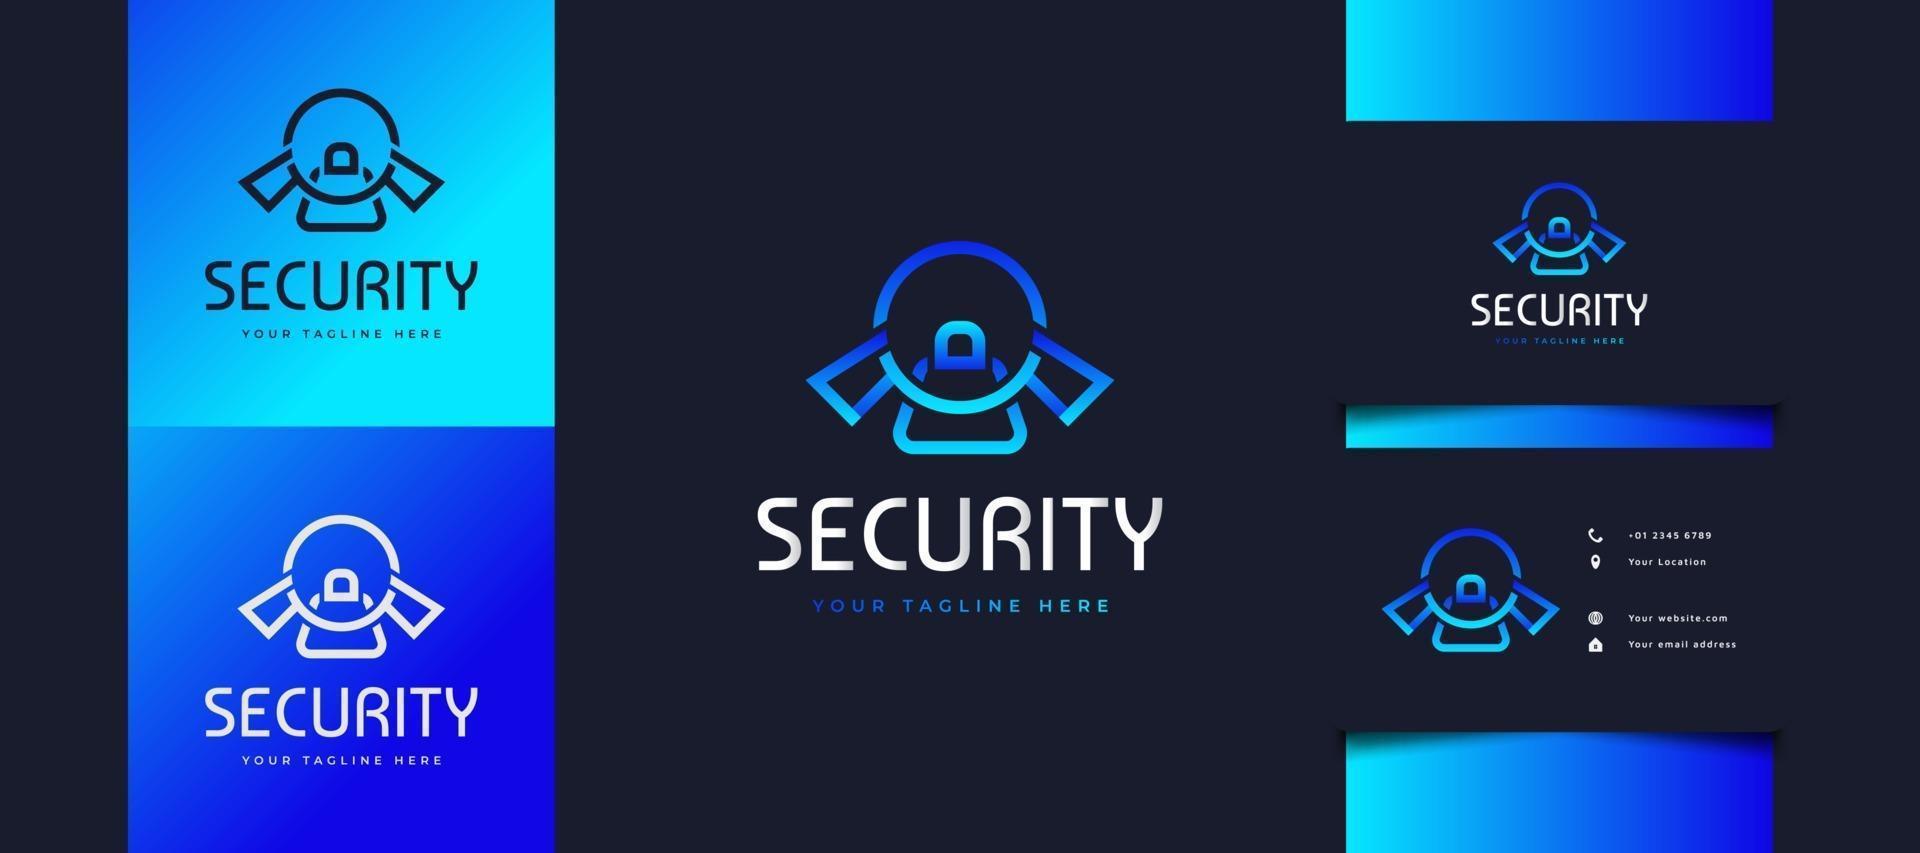 Security Lock Logo with Modern Concept in Blue Gradient, Usable For Business or Technology Logos. Cyber Security Logo Design vector